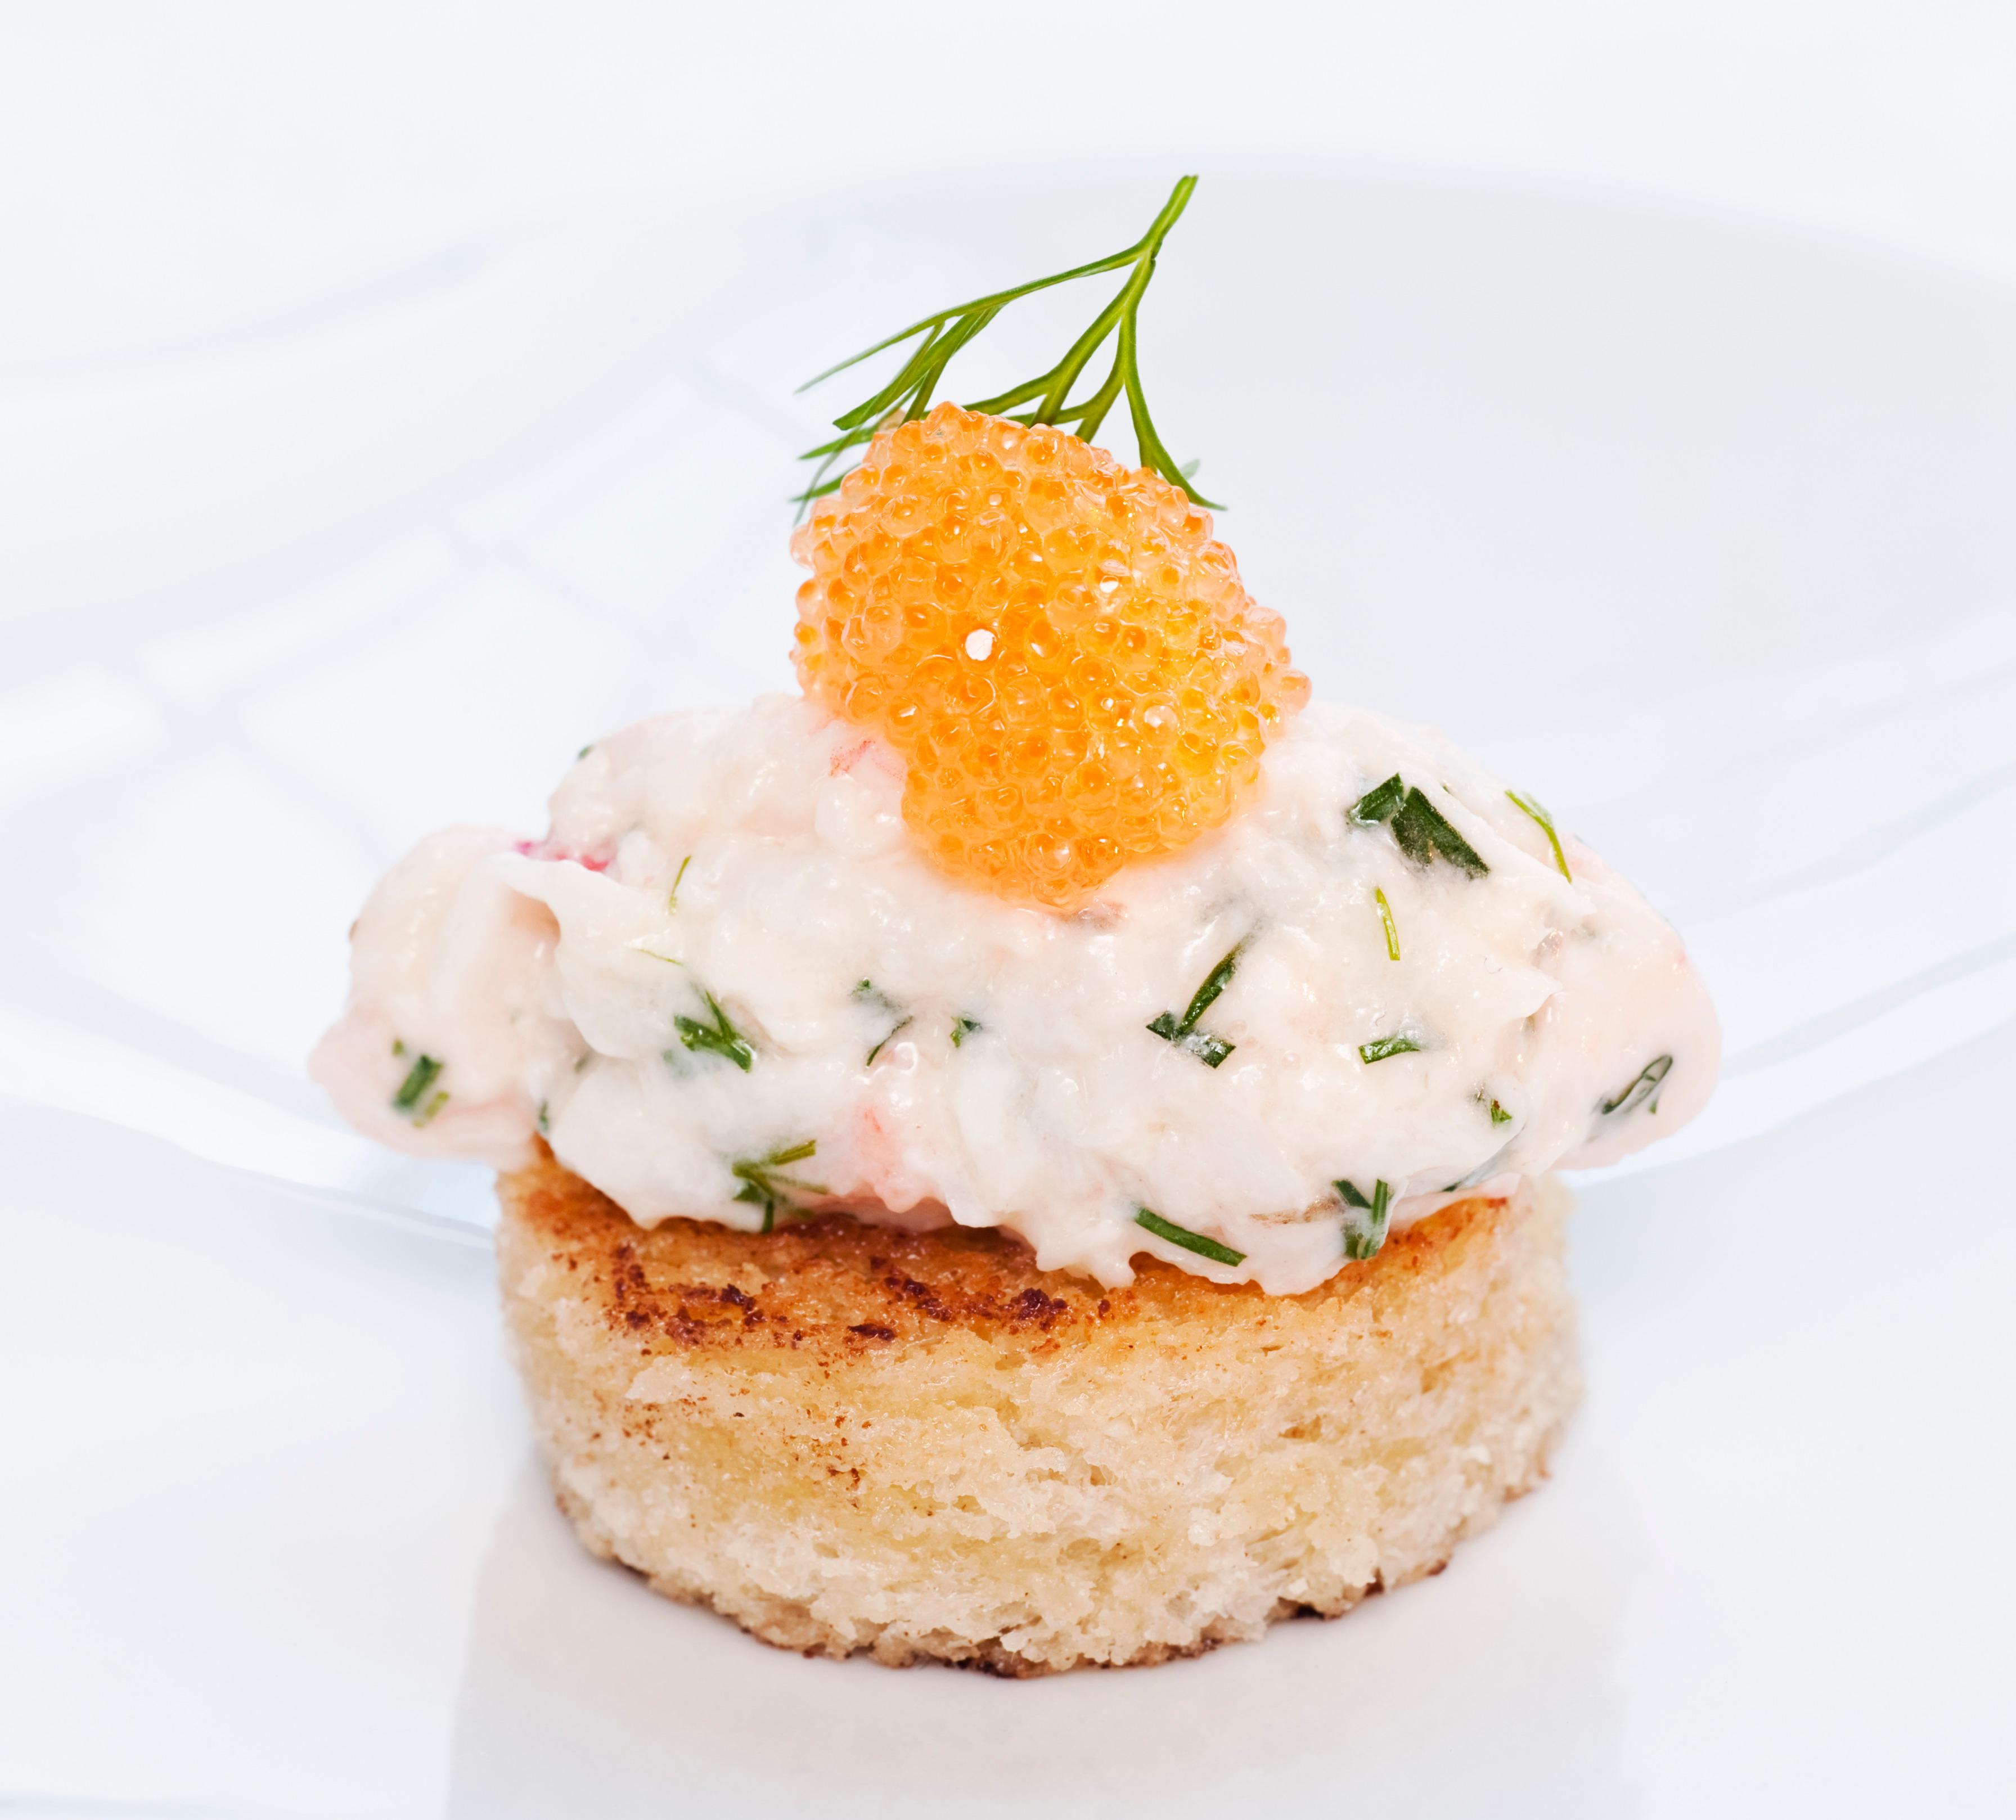 A small, round piece of bred with a mixture on top. Garnished with roe and a sprig of dill.